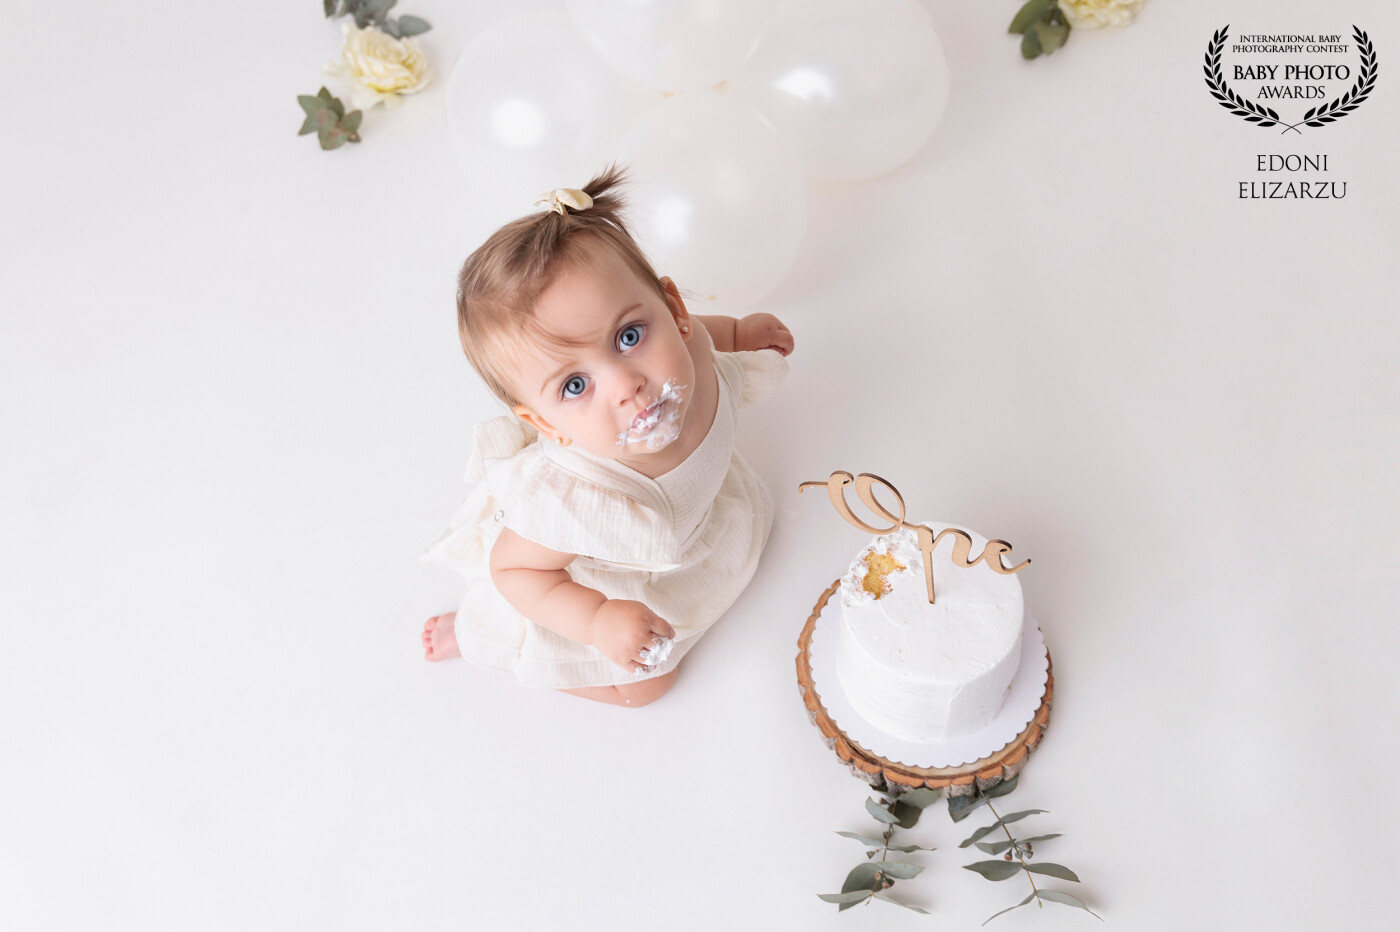 First year of this baby. She really enjoyed her photo session and her cake. I loved this photo from the first moment I saw it on camera.